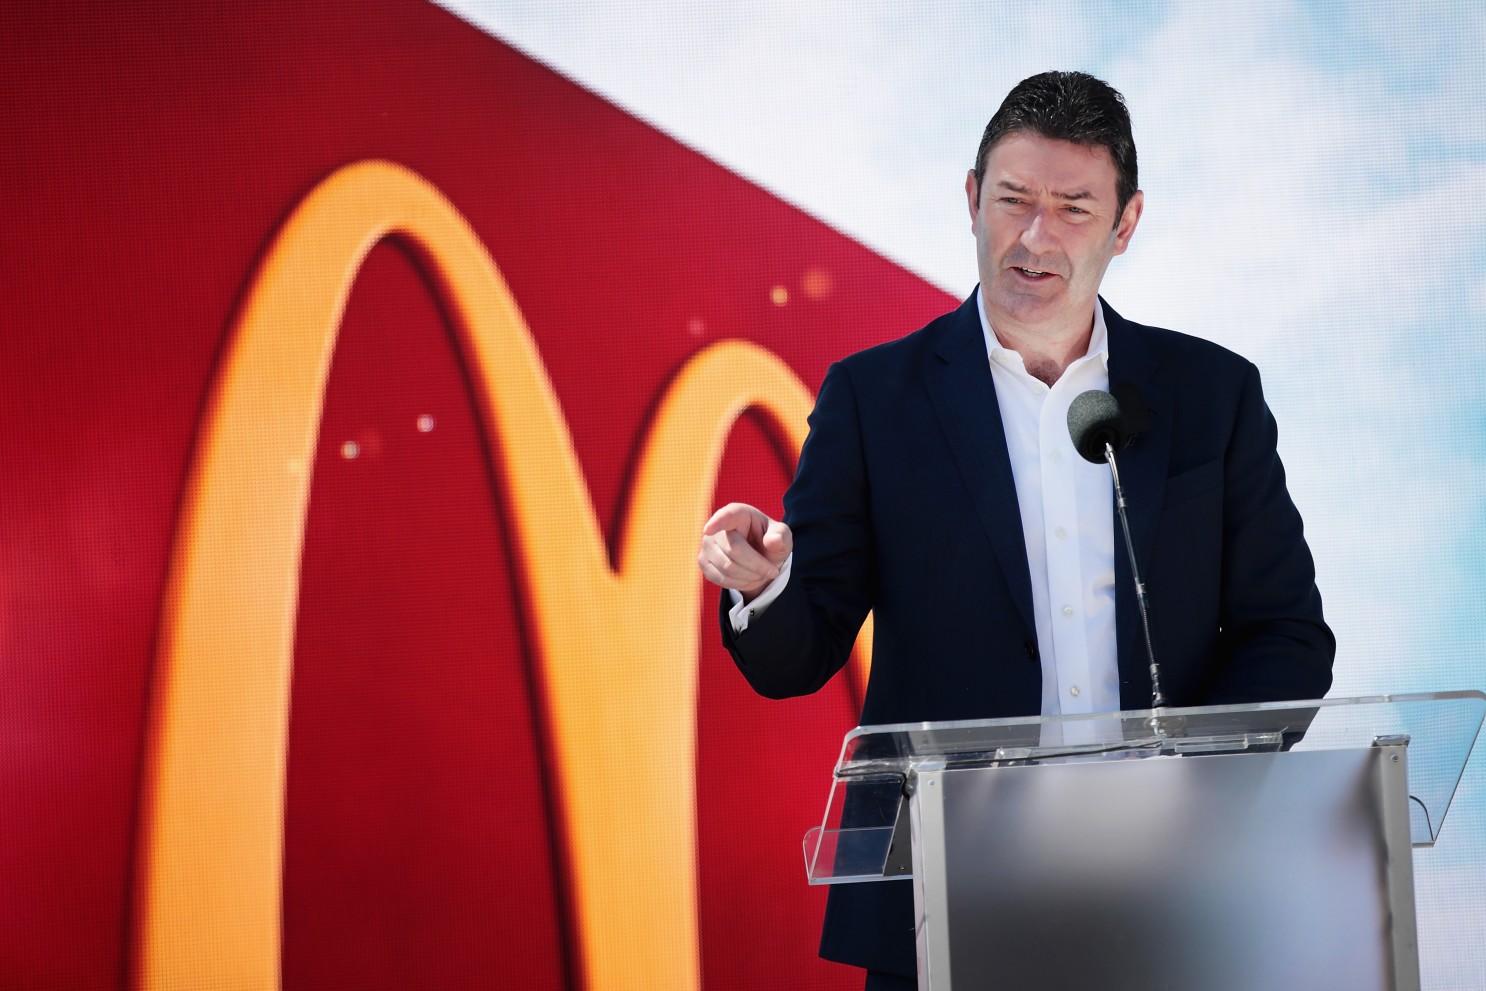 Steve Easterbrook, ex-CEO do Mc Donald's (Foto: Los Angeles Times)